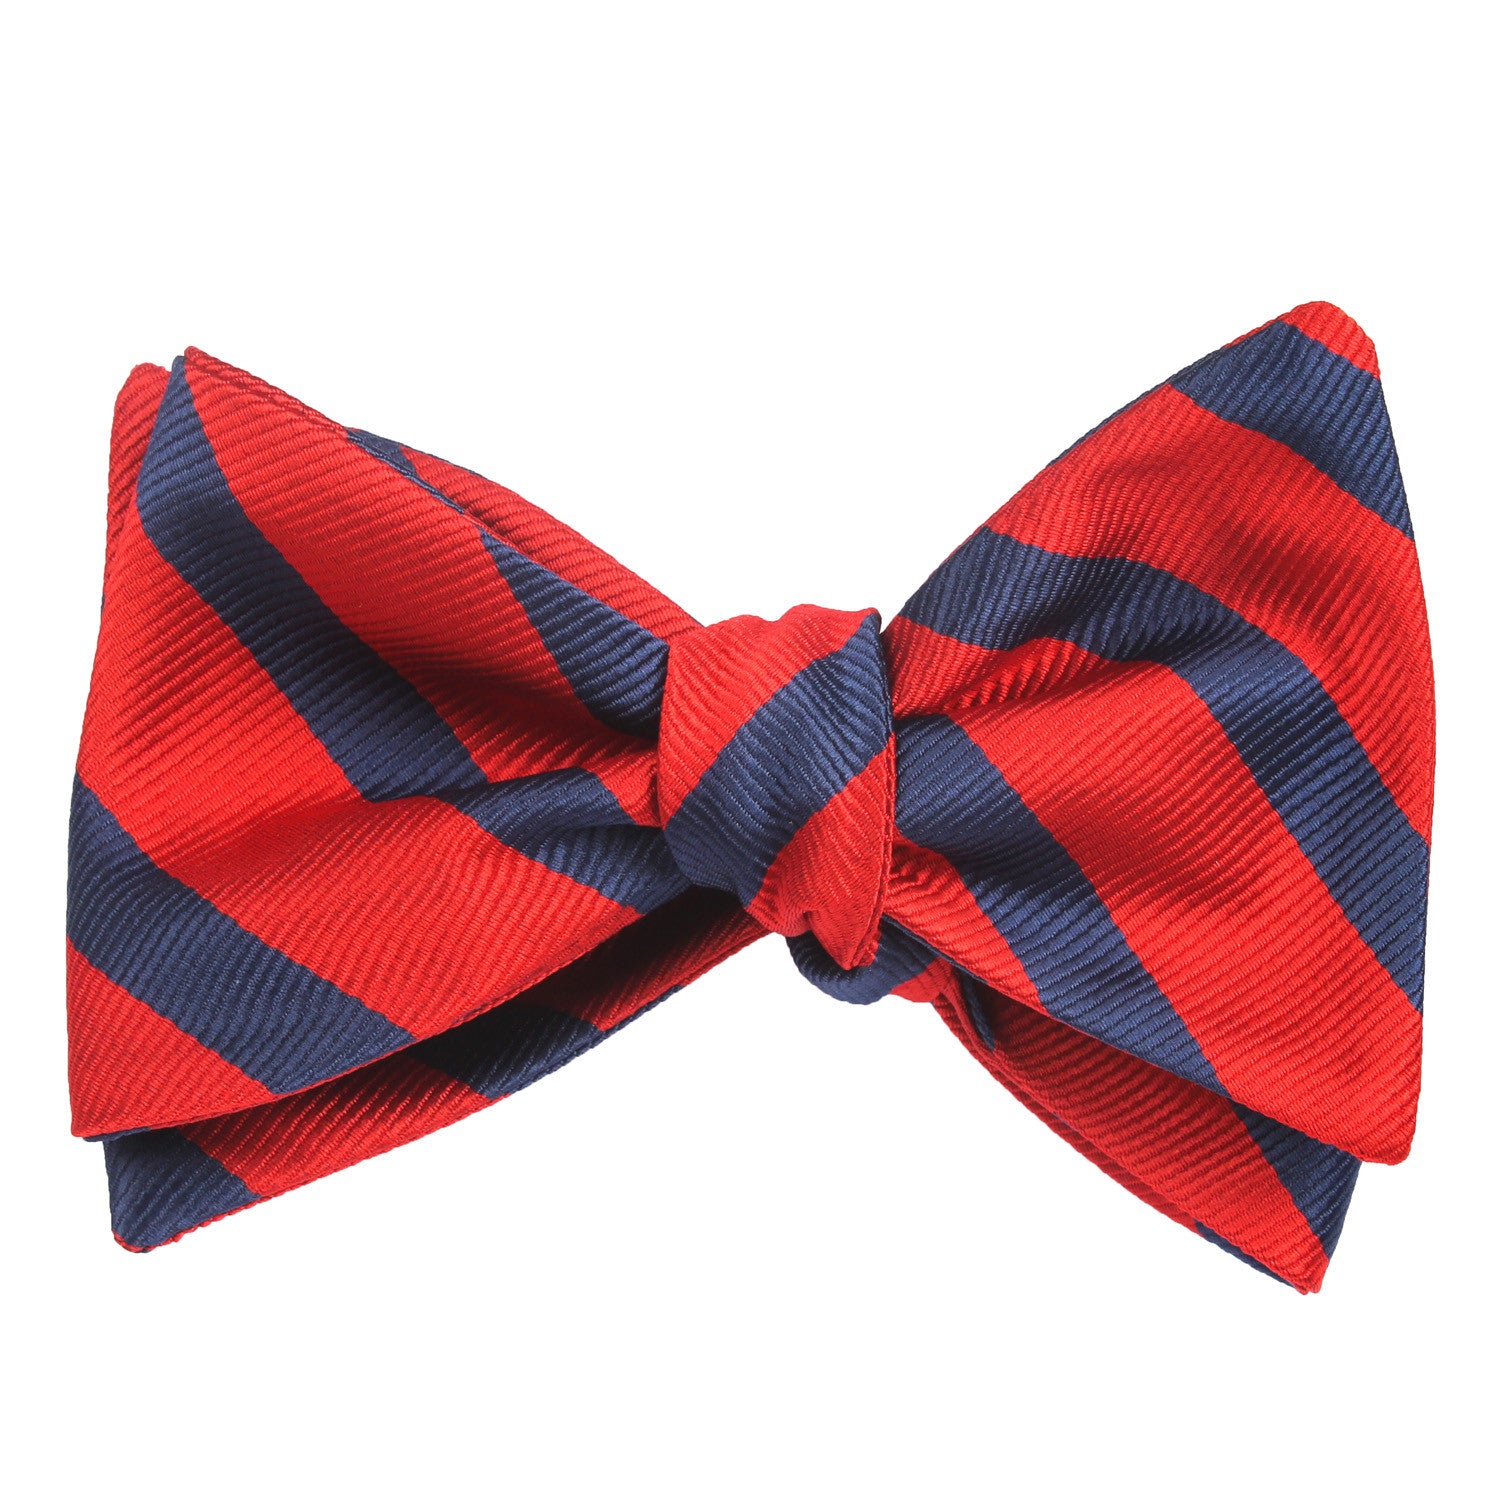 Red and Navy Blue Diagonal - Bow Tie (Untied) Self tied knot by OTAA